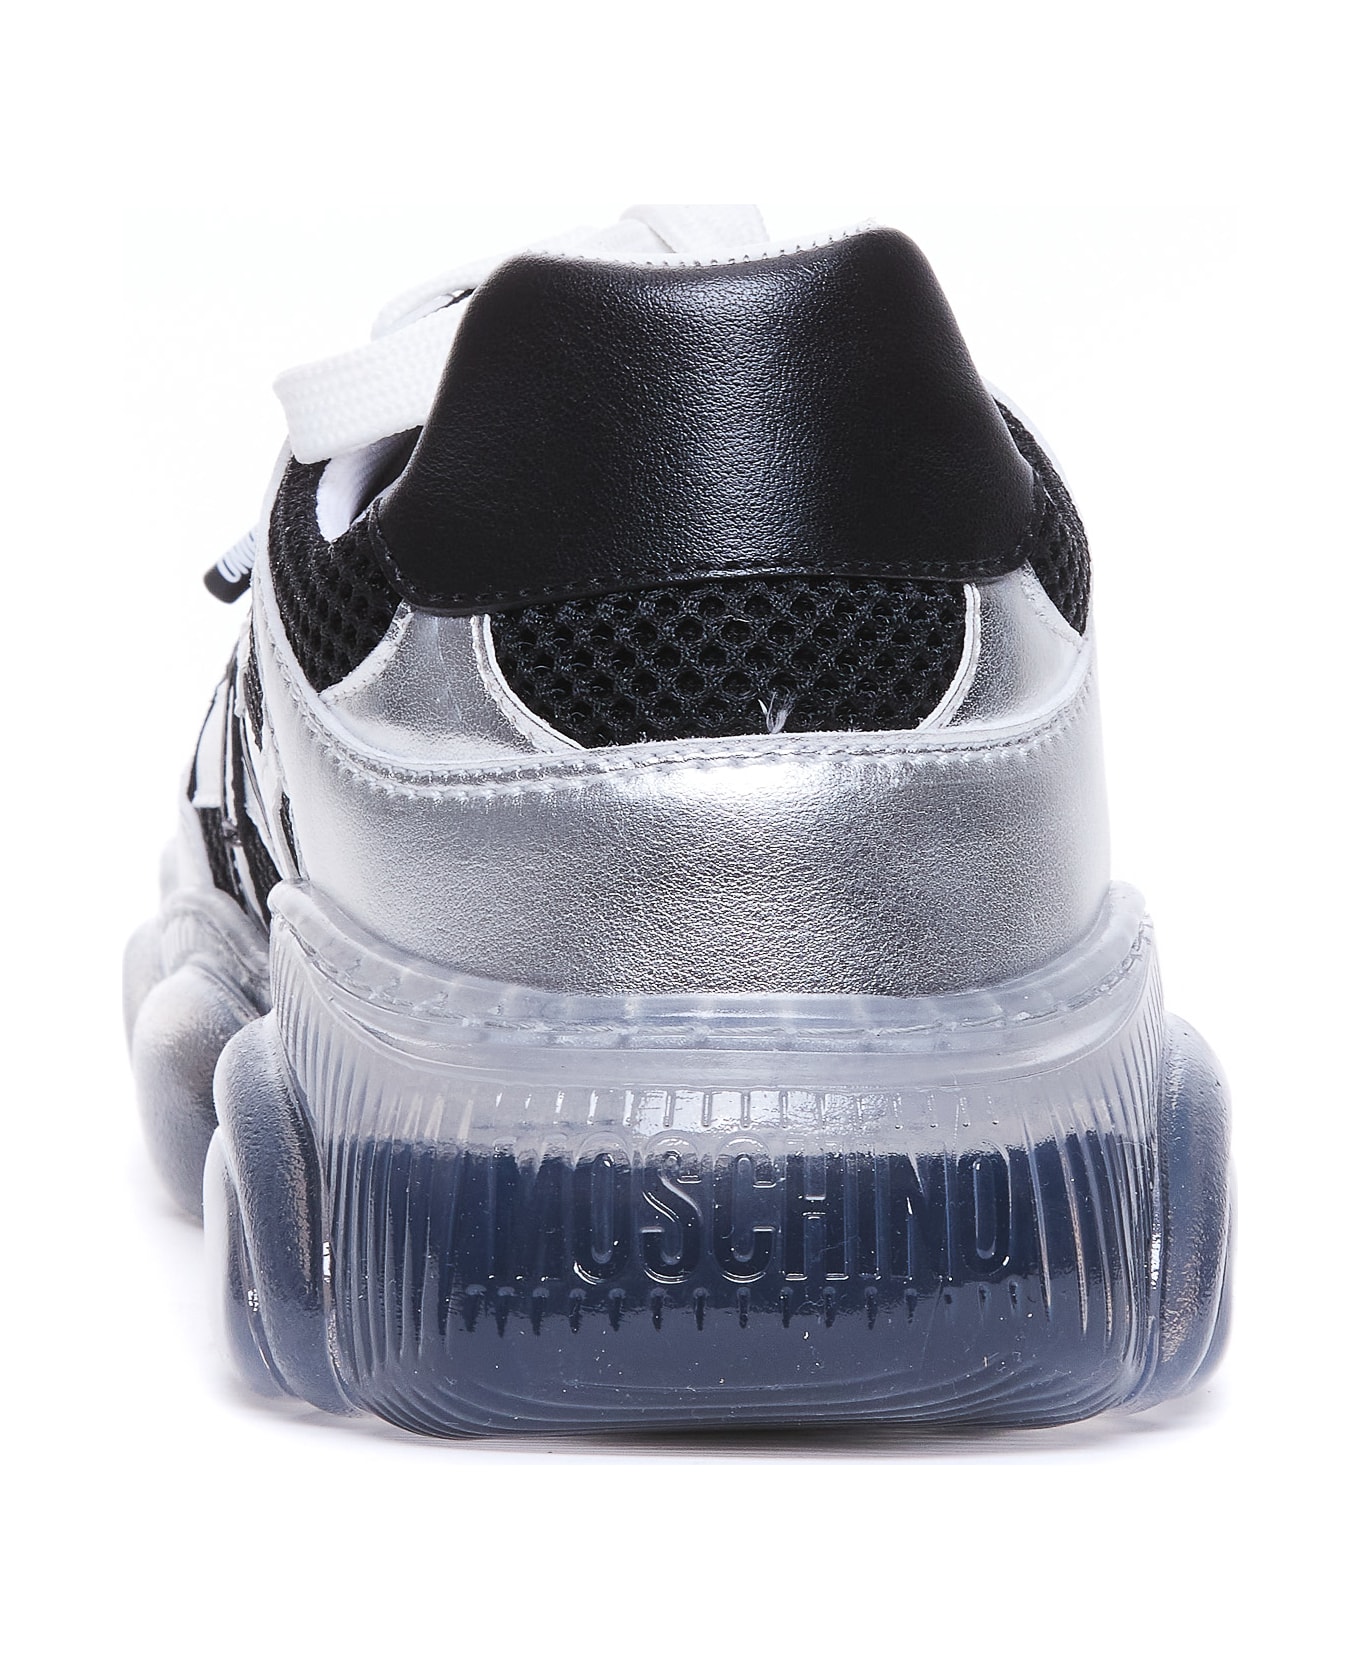 Moschino Teddy Shoes With Transparent Sole - Black